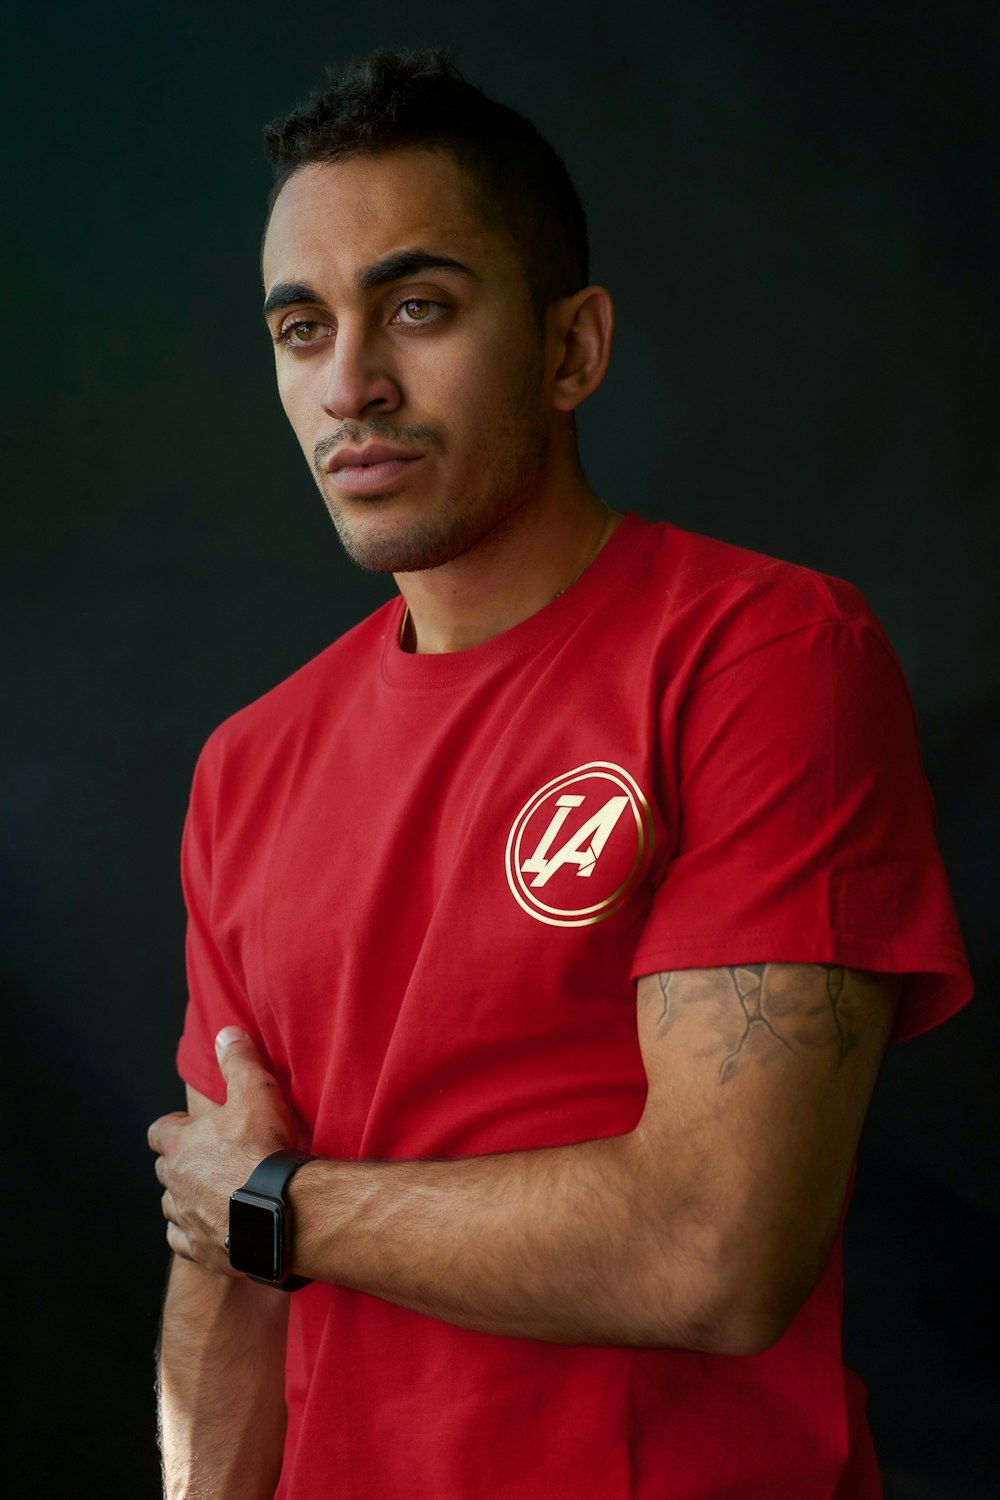 man wearing red with white crew-neck t-shirt standing